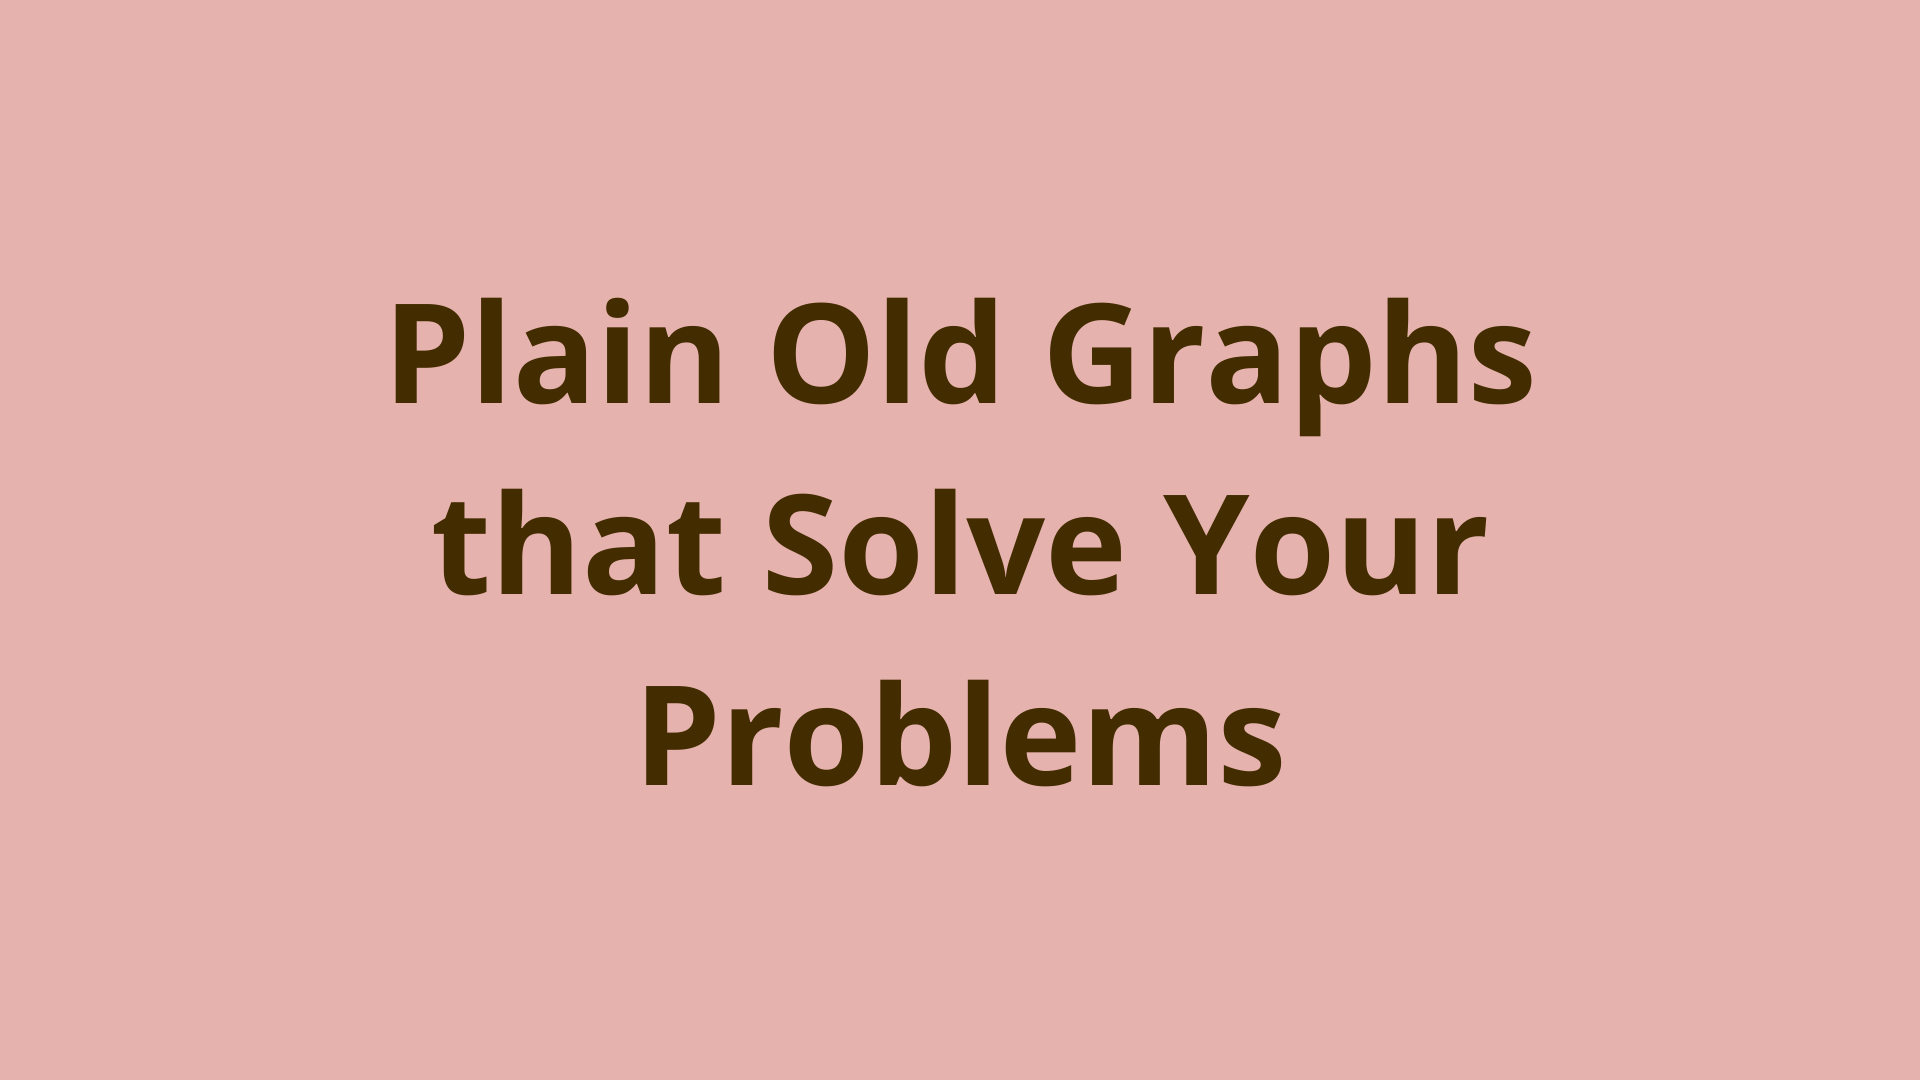 Image of Plain old graphs that solve your problems